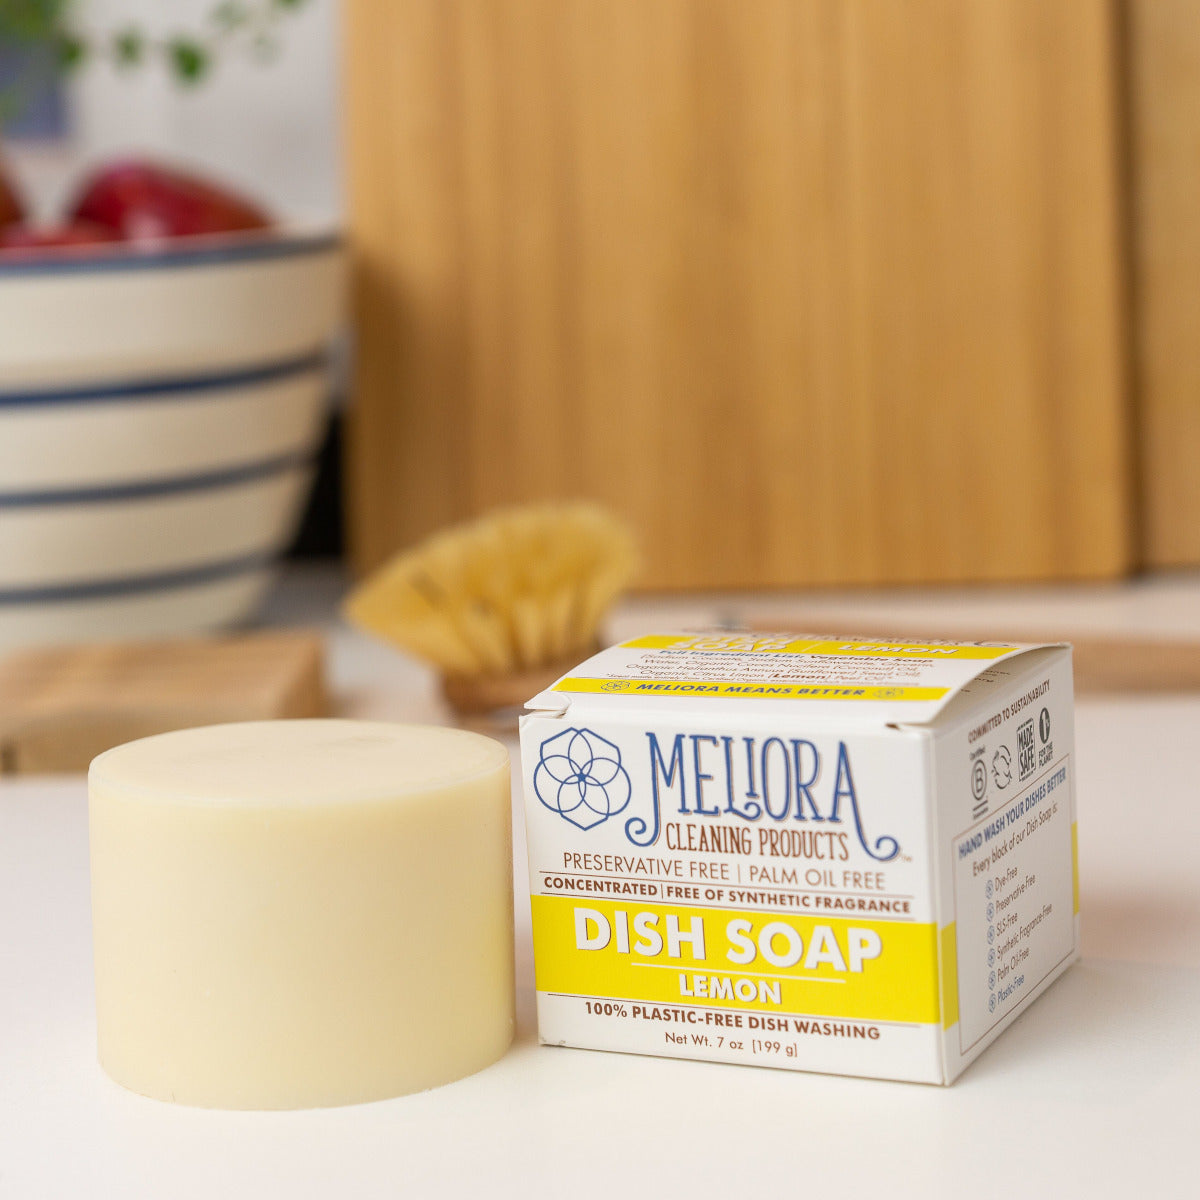 Meliora Dish Soap for Hand Washing MADE SAFE